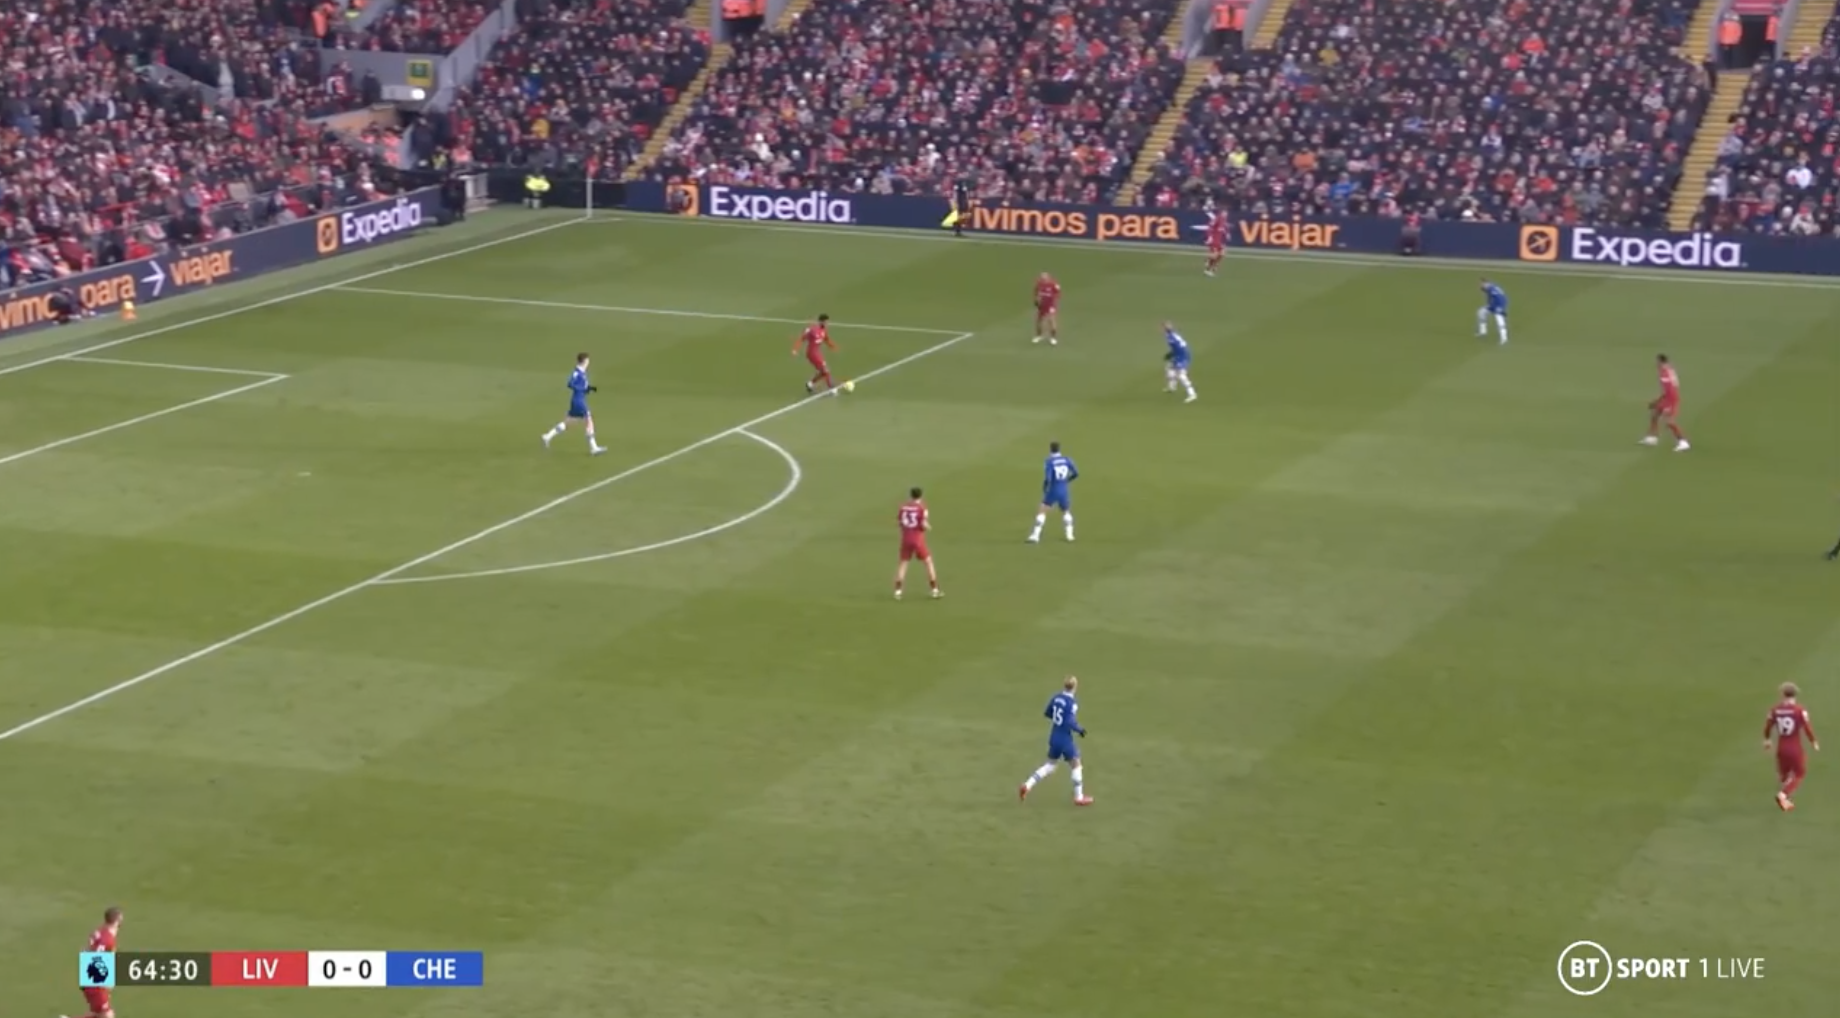 Liverpool building play against Chelsea